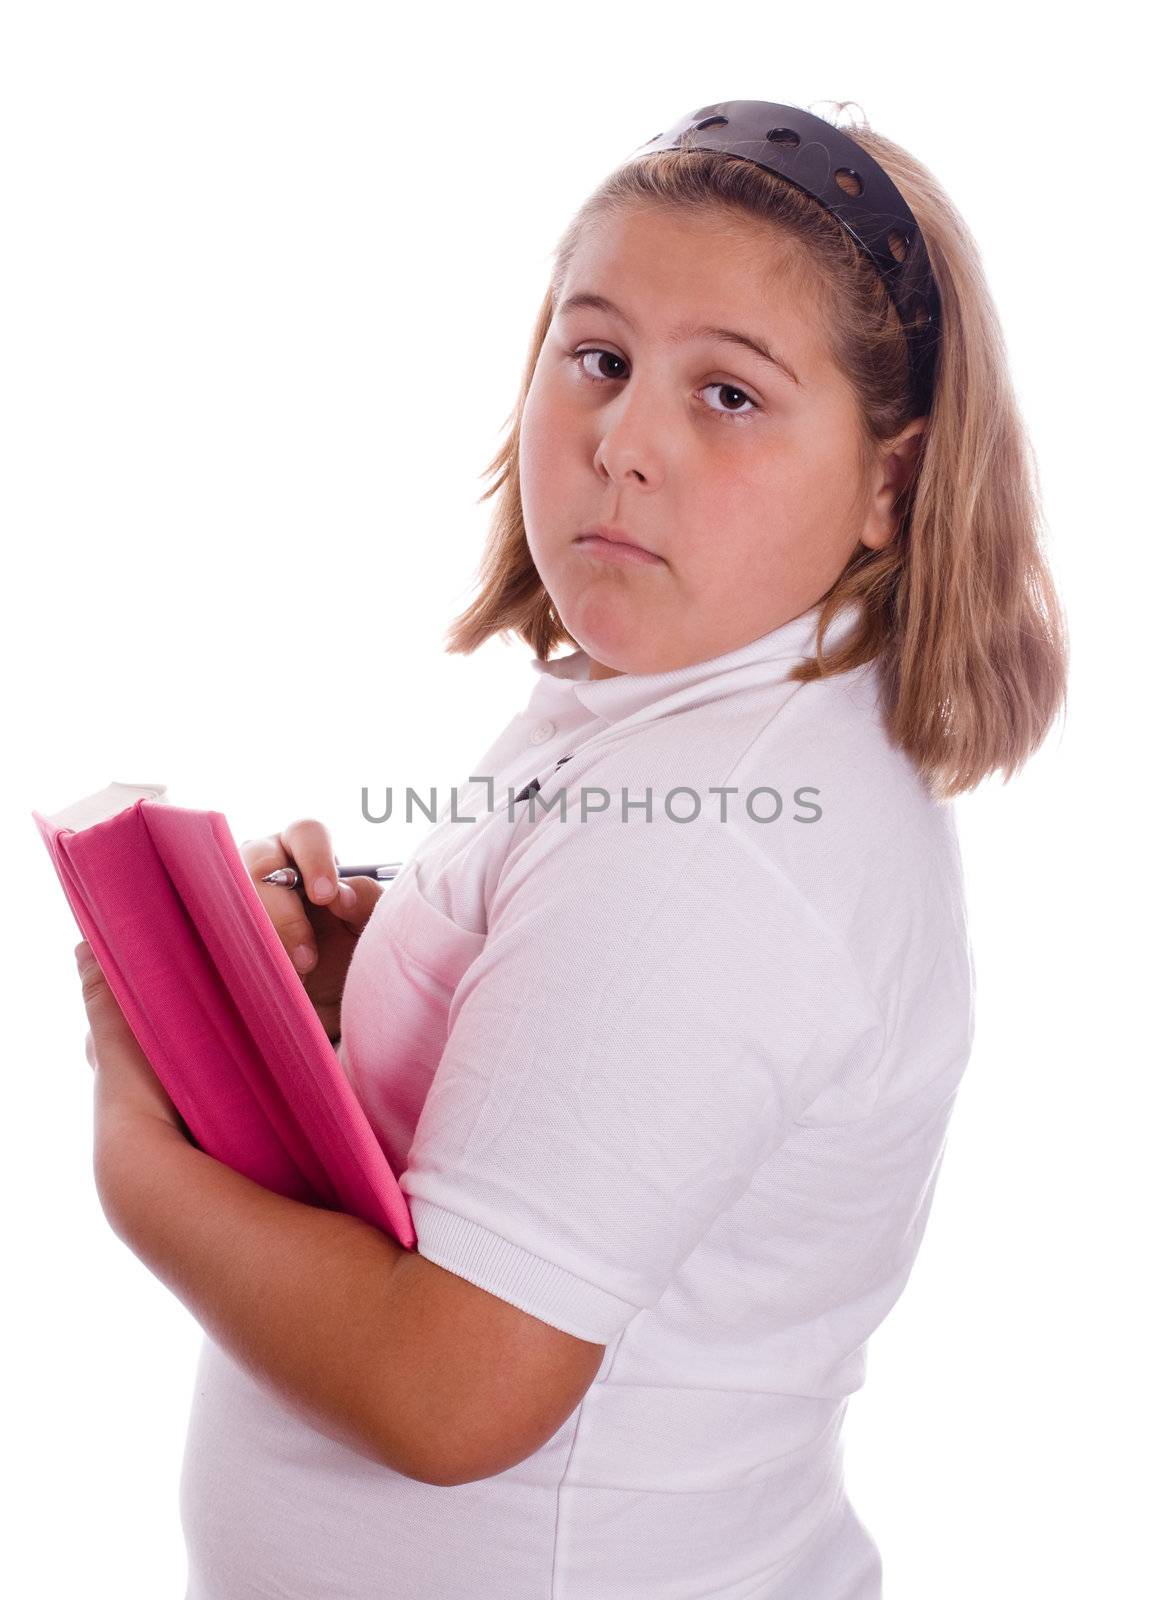 A young girl trying to hide her diary, isolated against a white background